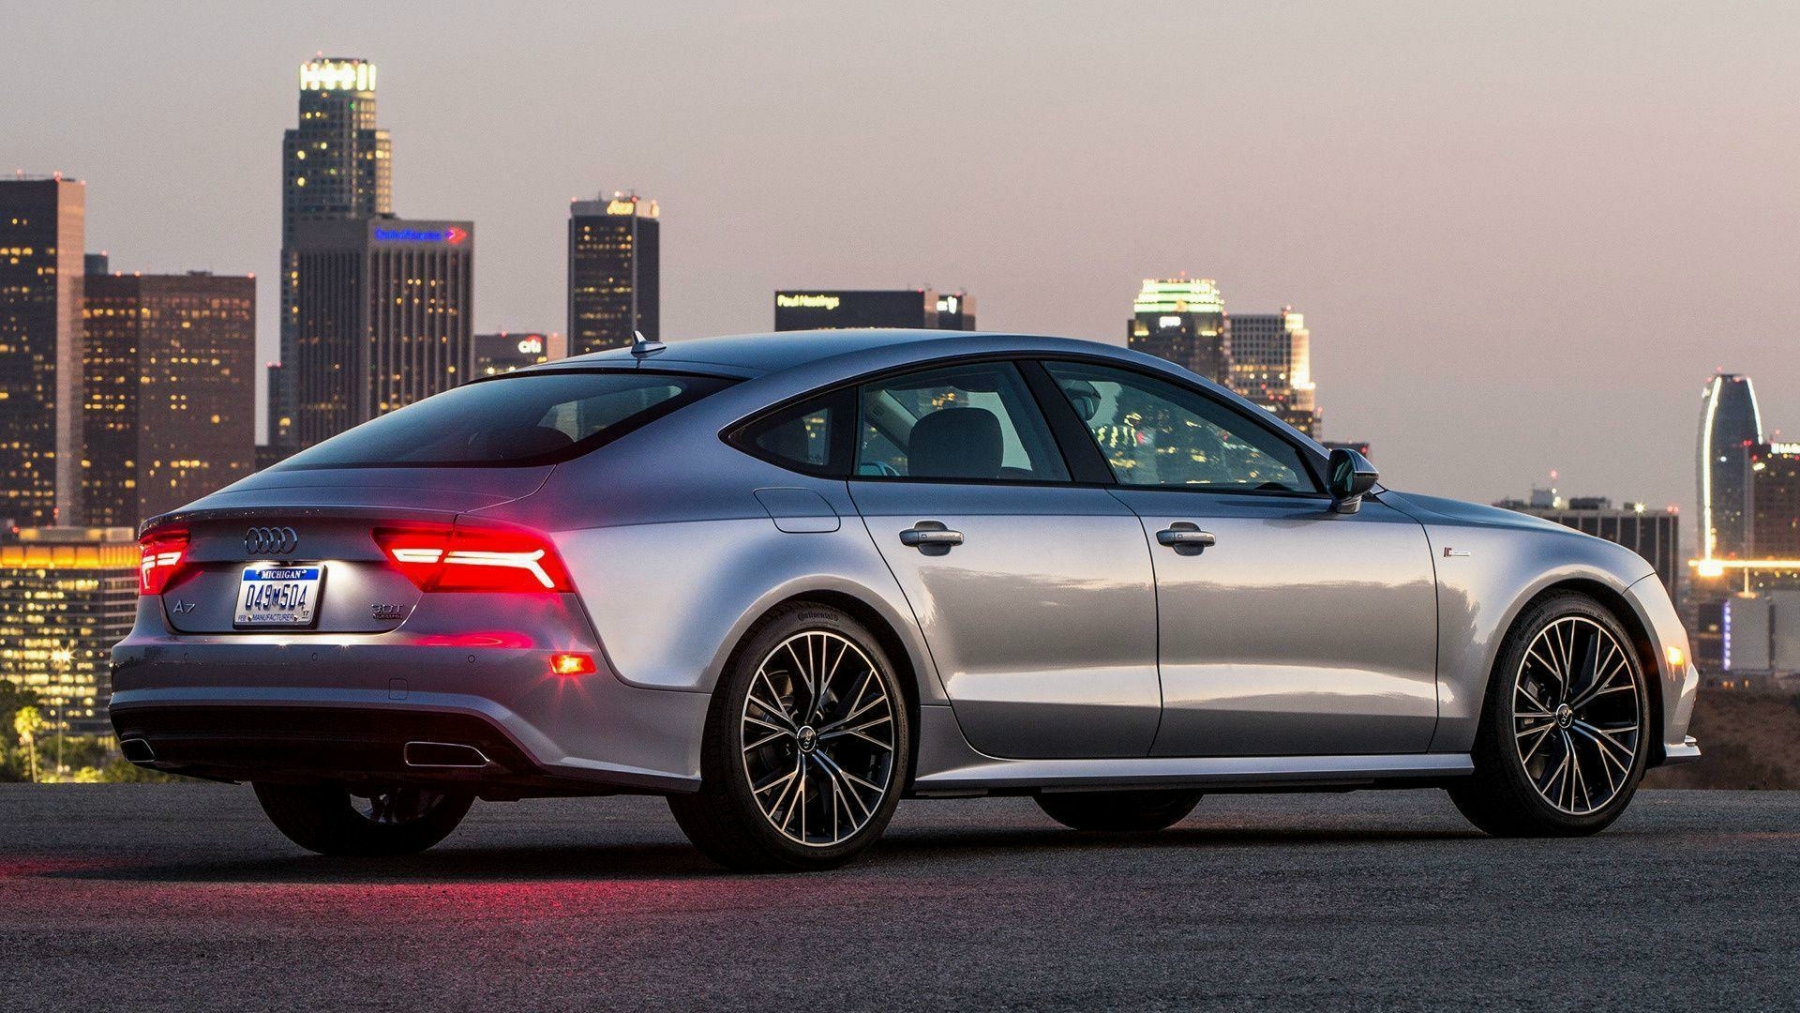 Audi A7 Hd Wallpapers Background Images Photos Pictures Yl